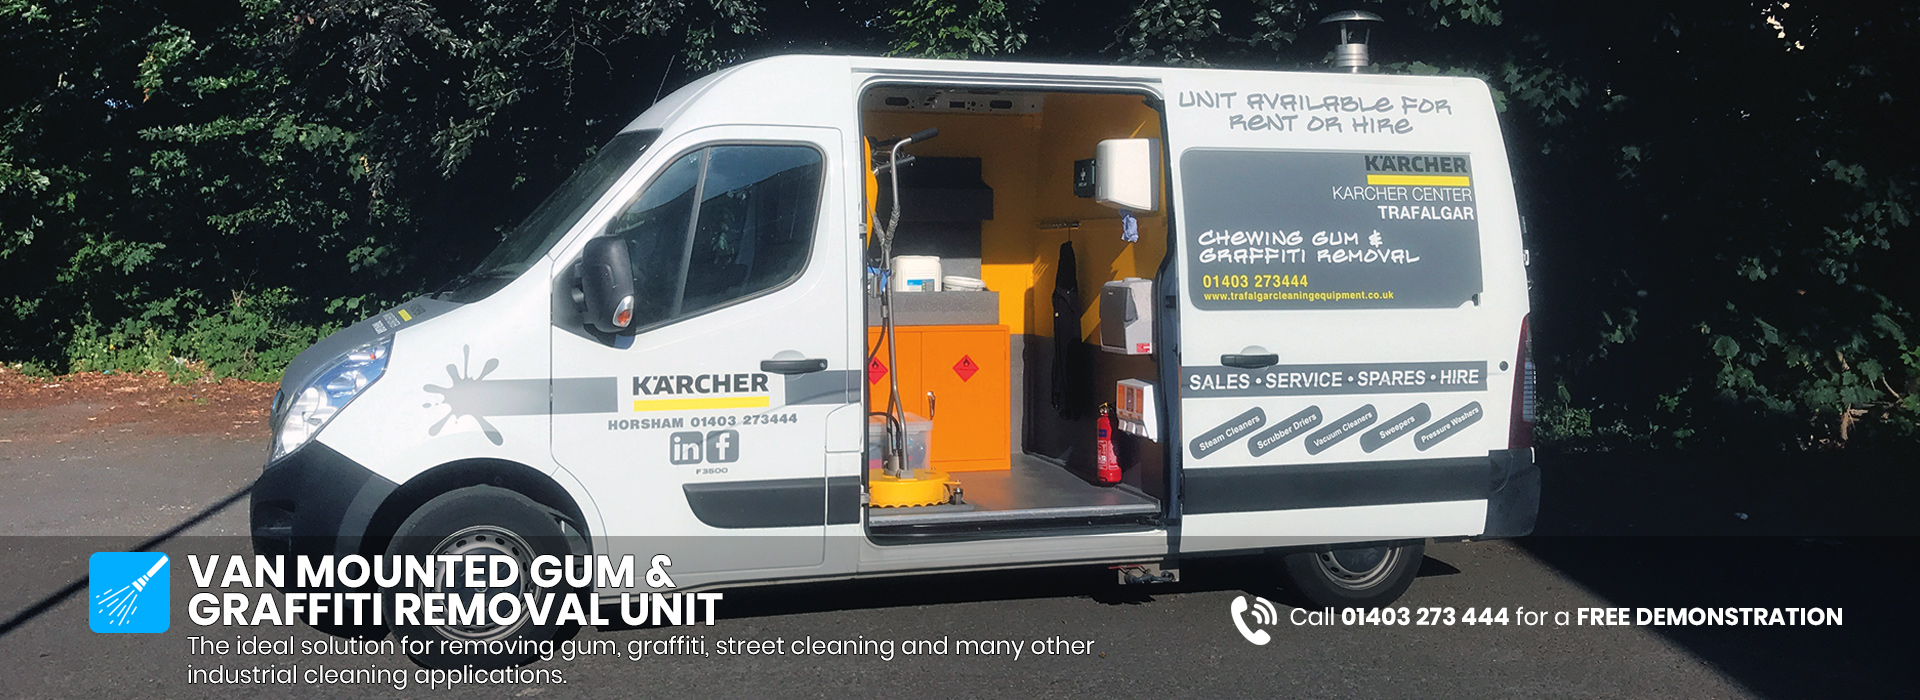 Van mounted gum and graffiti removal unit